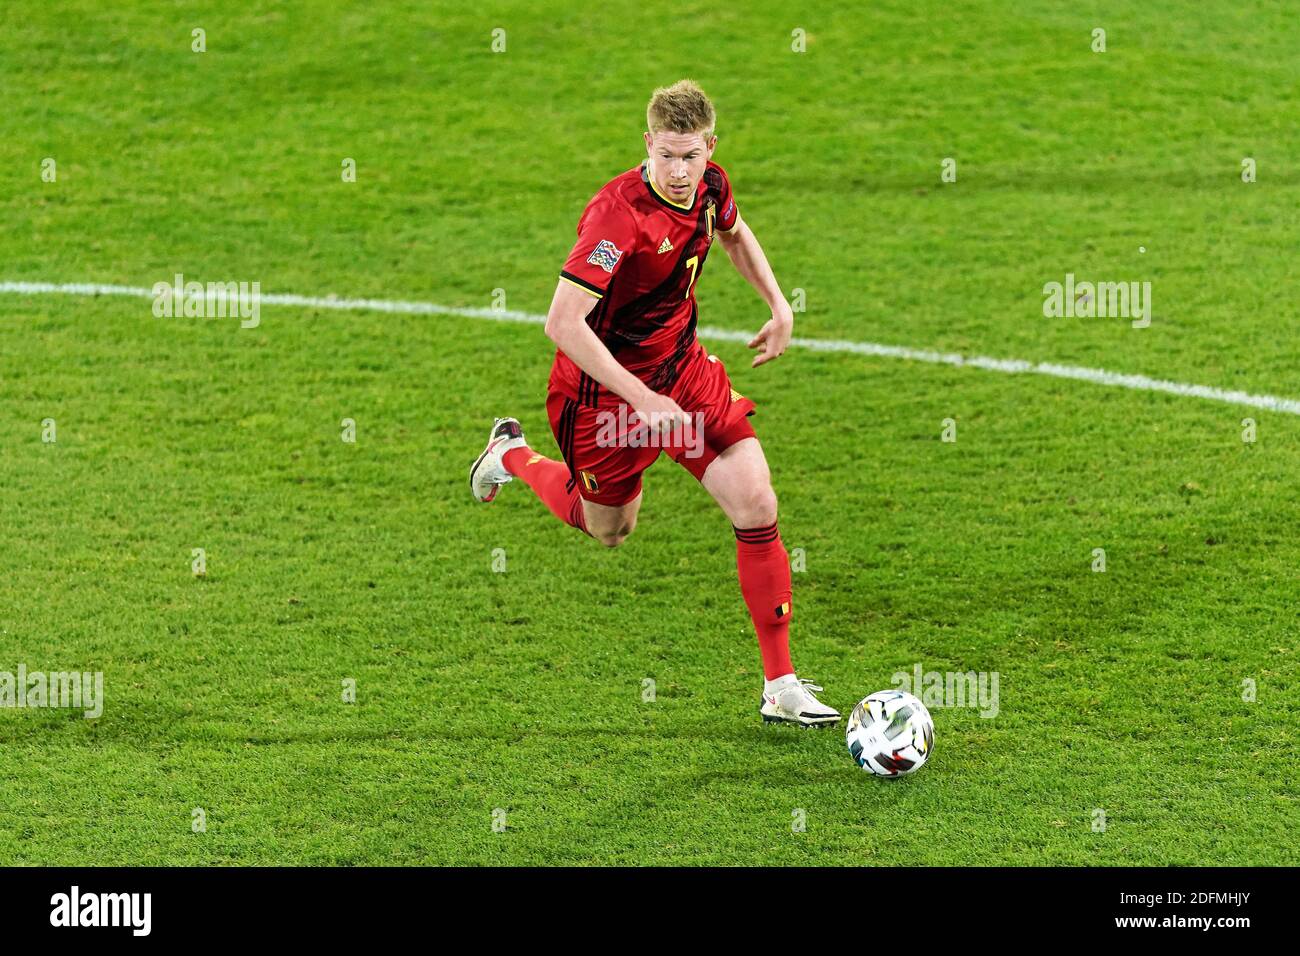 Kevin De Bruyne of Belgium during the UEFA Nations League group stage match between Belgium and Denkmark at King Power at Den Dreef Stadion on November 18, 2020 in Heverlee, Belgium. Photo by Sylvain Lefevre /ABACAPRESS.COM Stock Photo